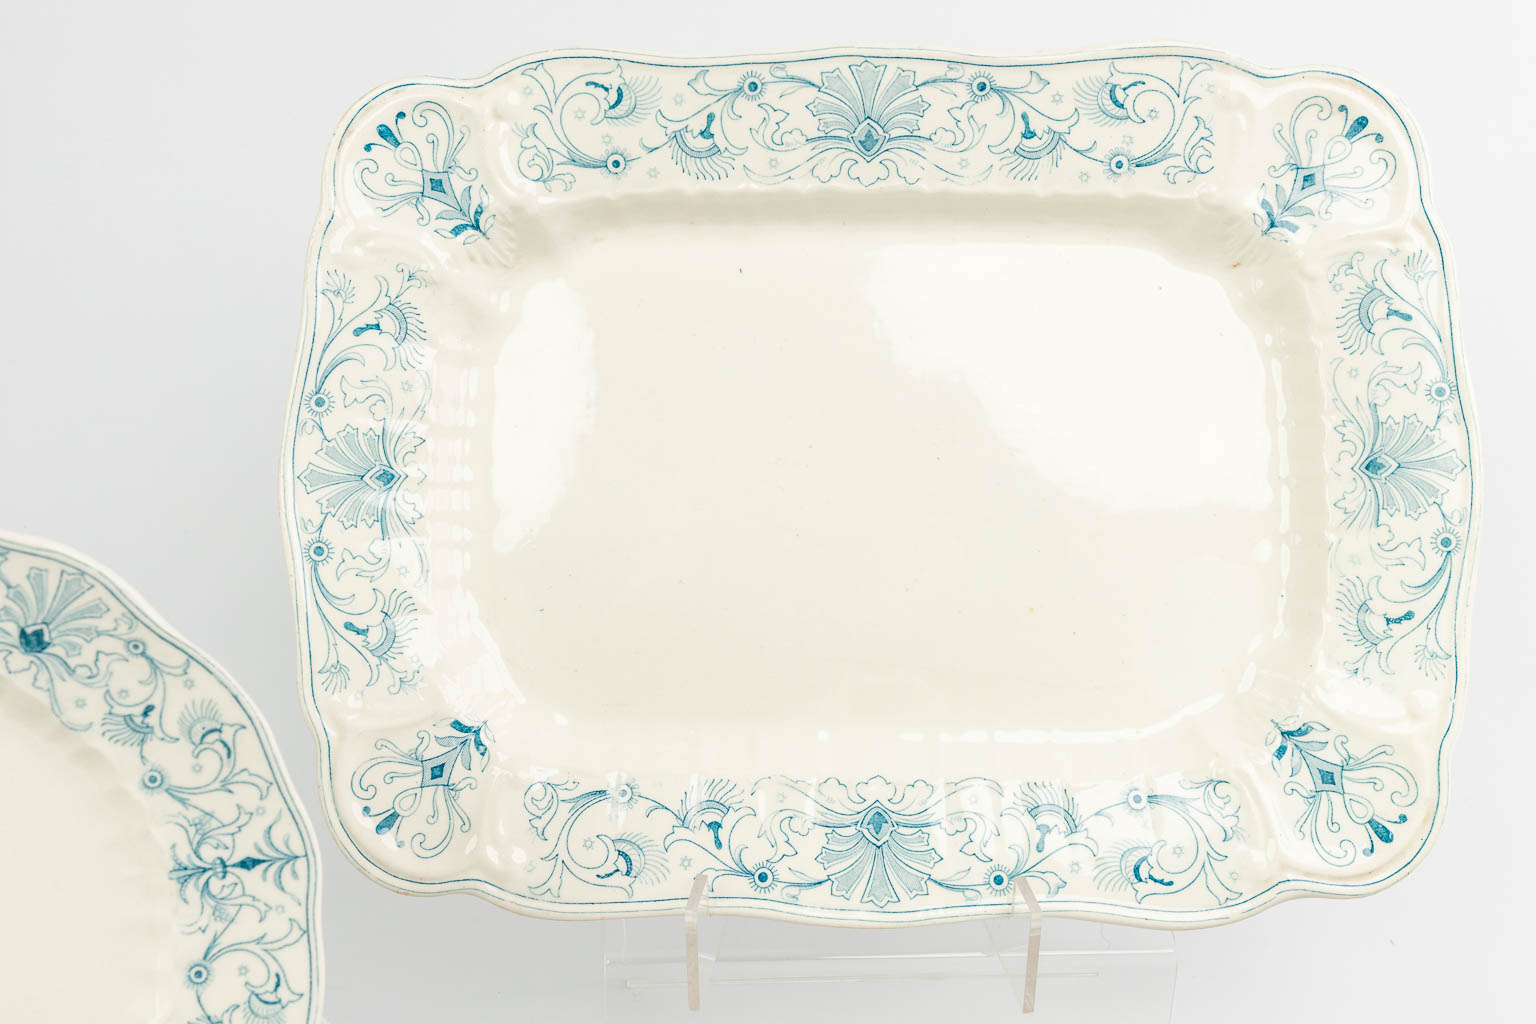 A large dinner service made of porcelain in the UK and marked 